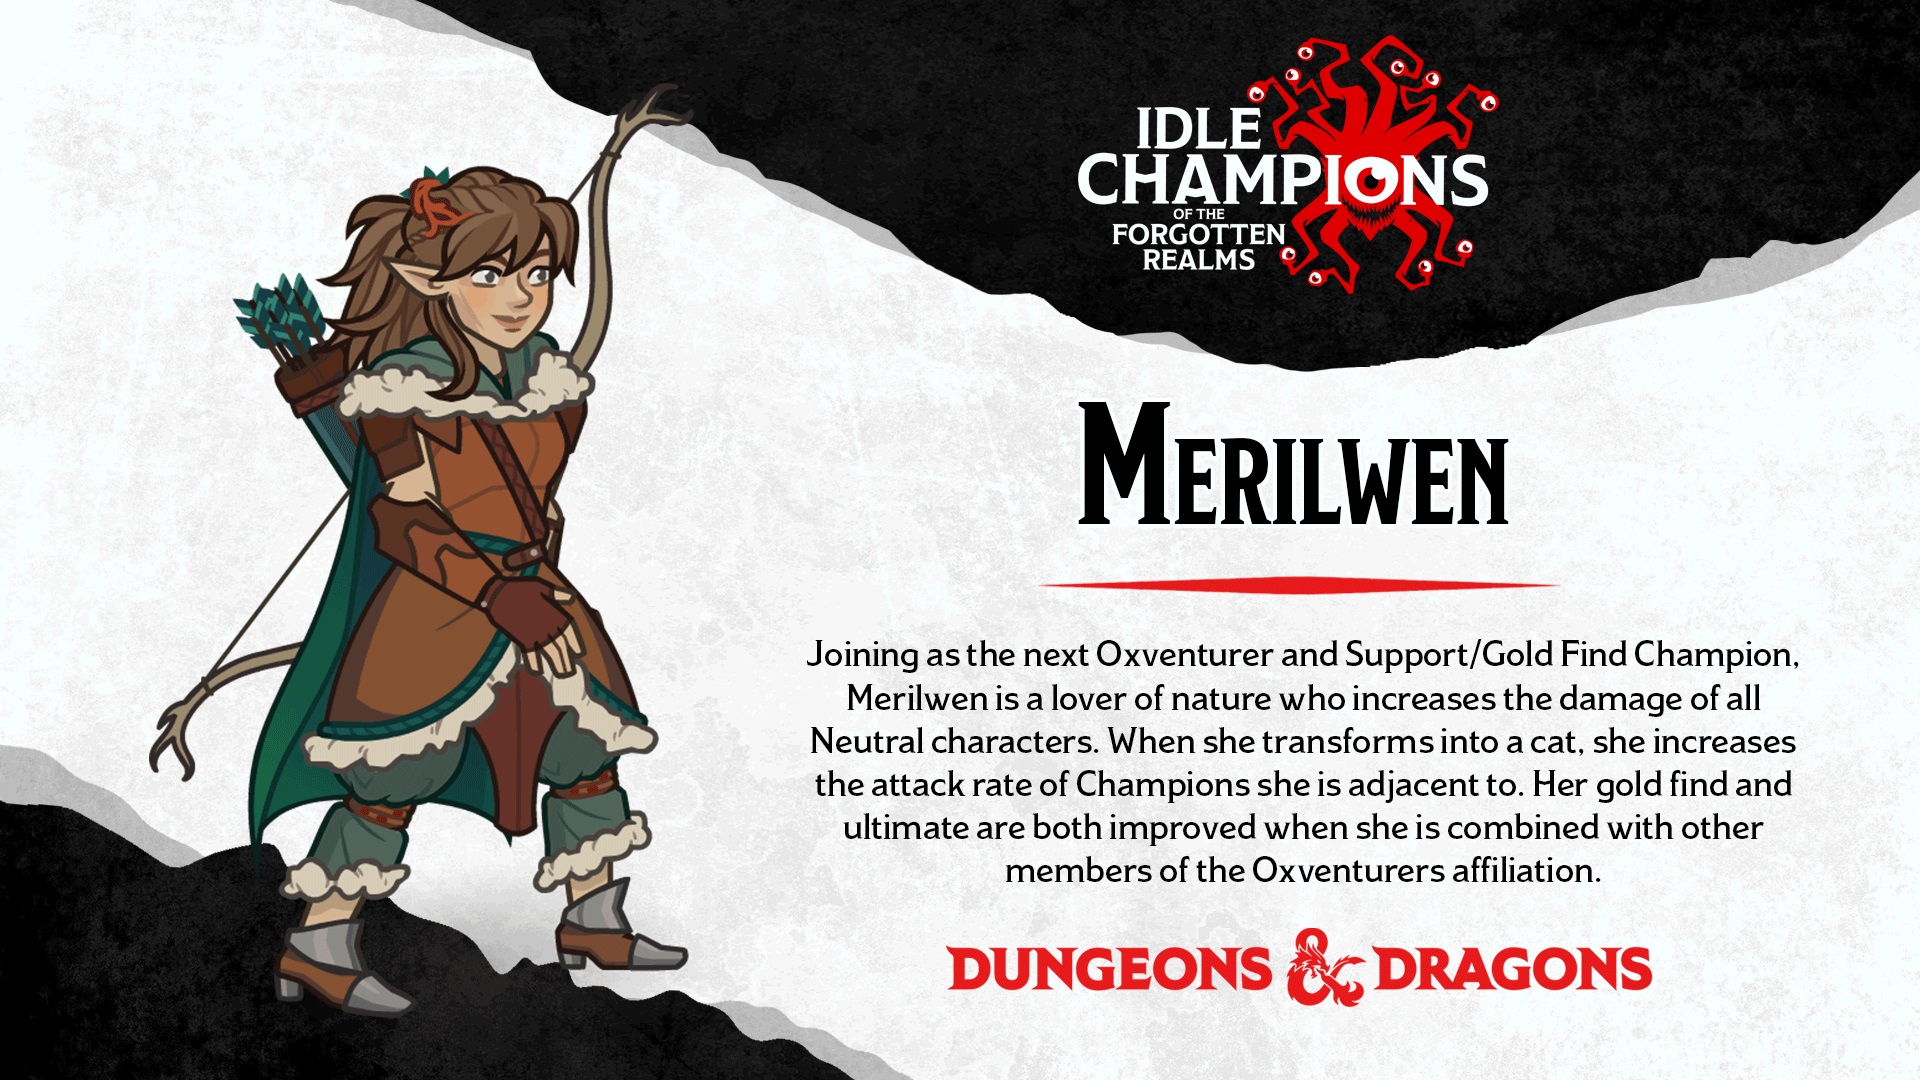 Idle Champions of the Forgotten Realms for Nintendo Switch